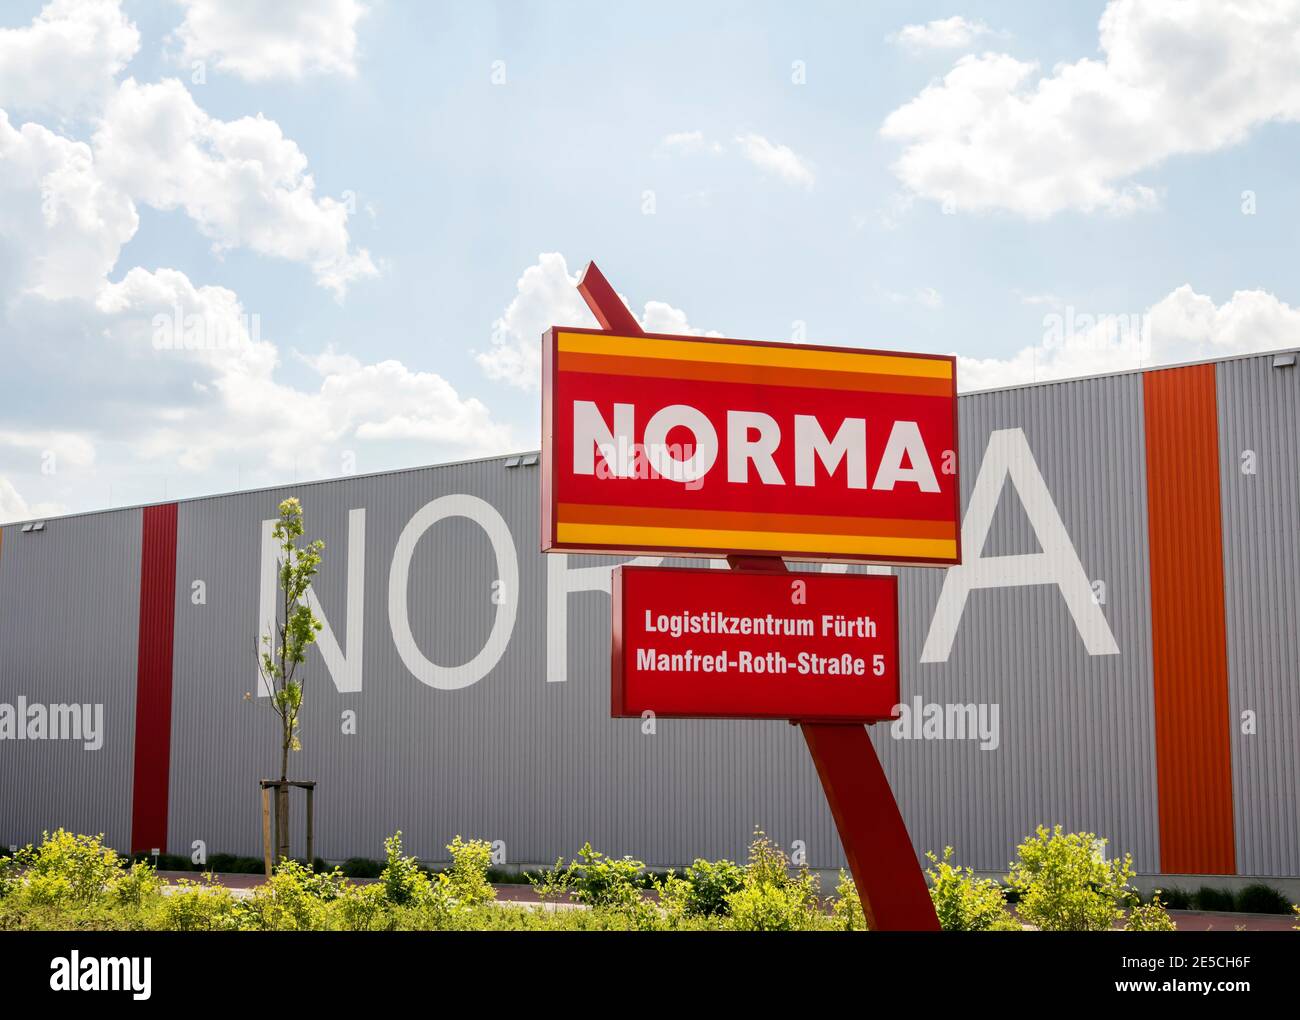 Furth, Germany : Norma discount supermarket. Norma is a food discount store with plus 1,400 stores in Europe with narrow product line at low prices. Stock Photo